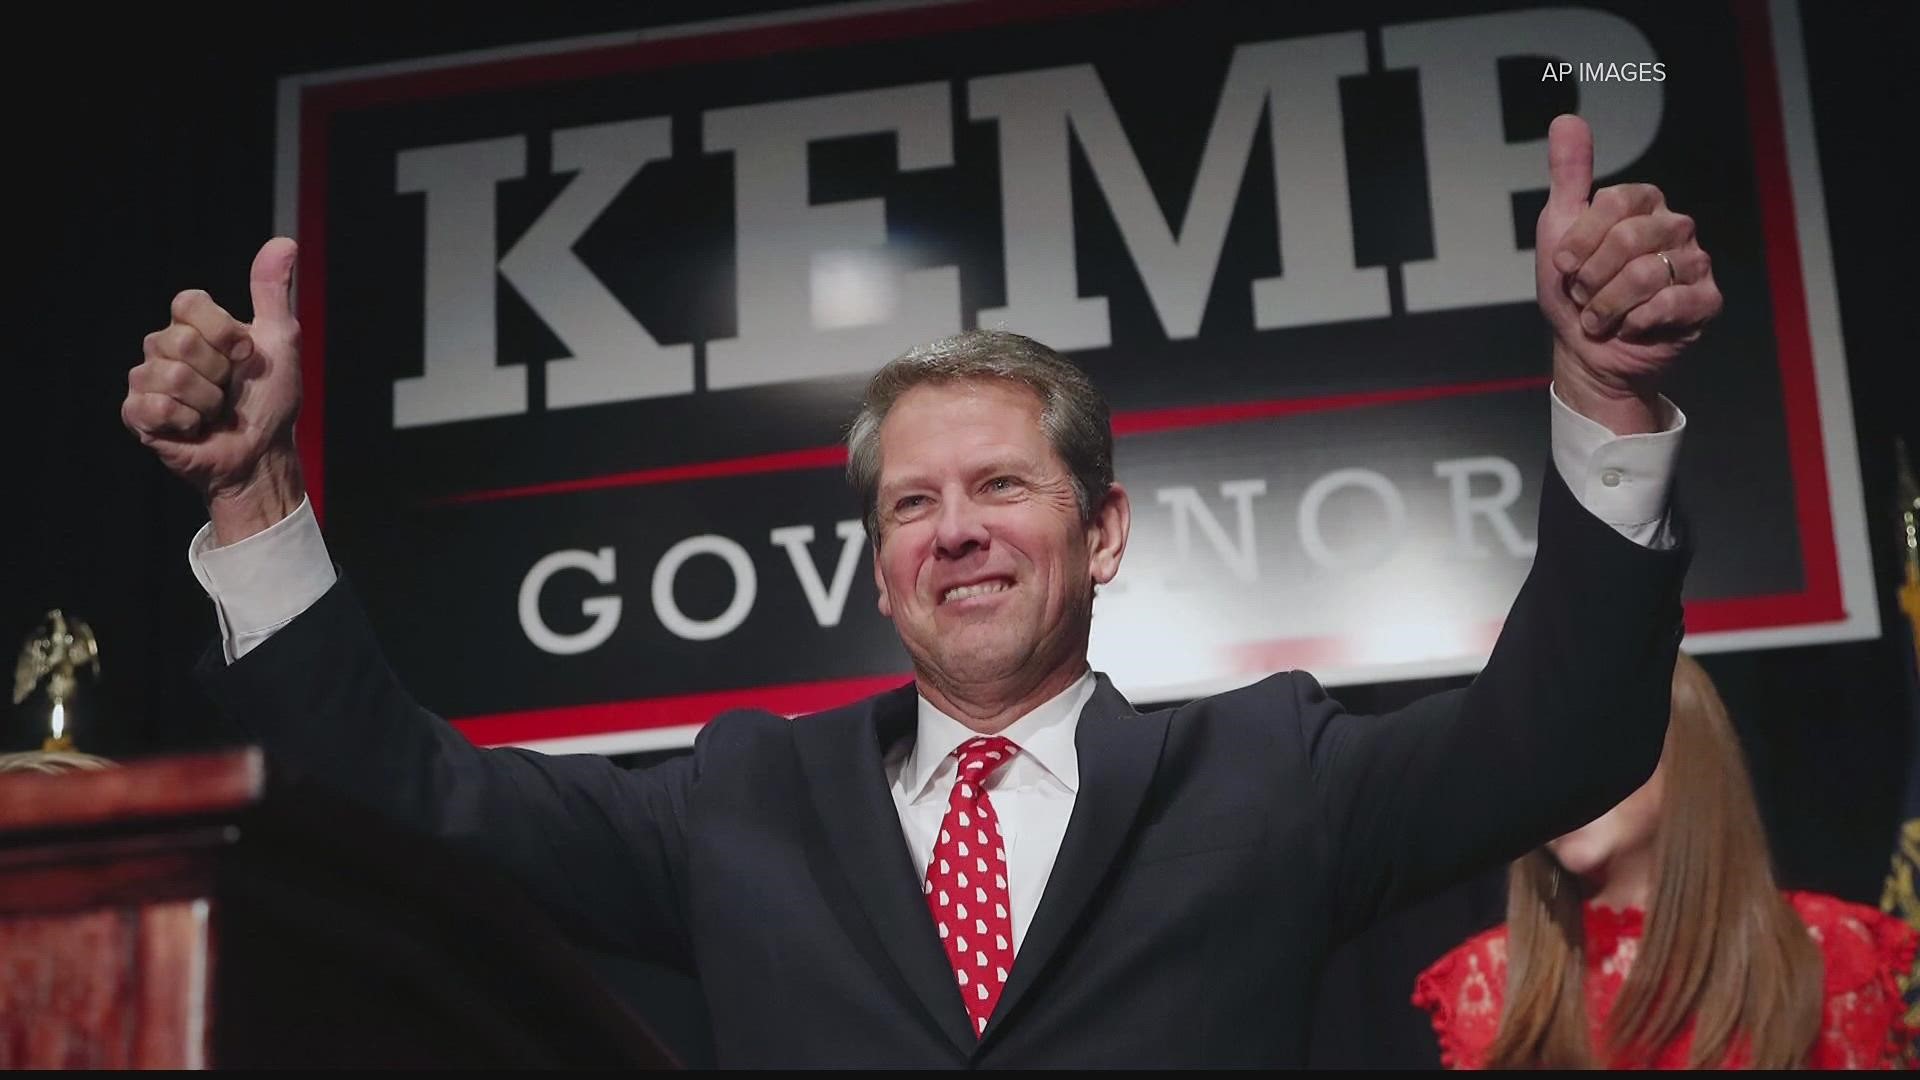 Lawyers for Kemp had argued that immunities related to his position as governor protect him from having to testify.